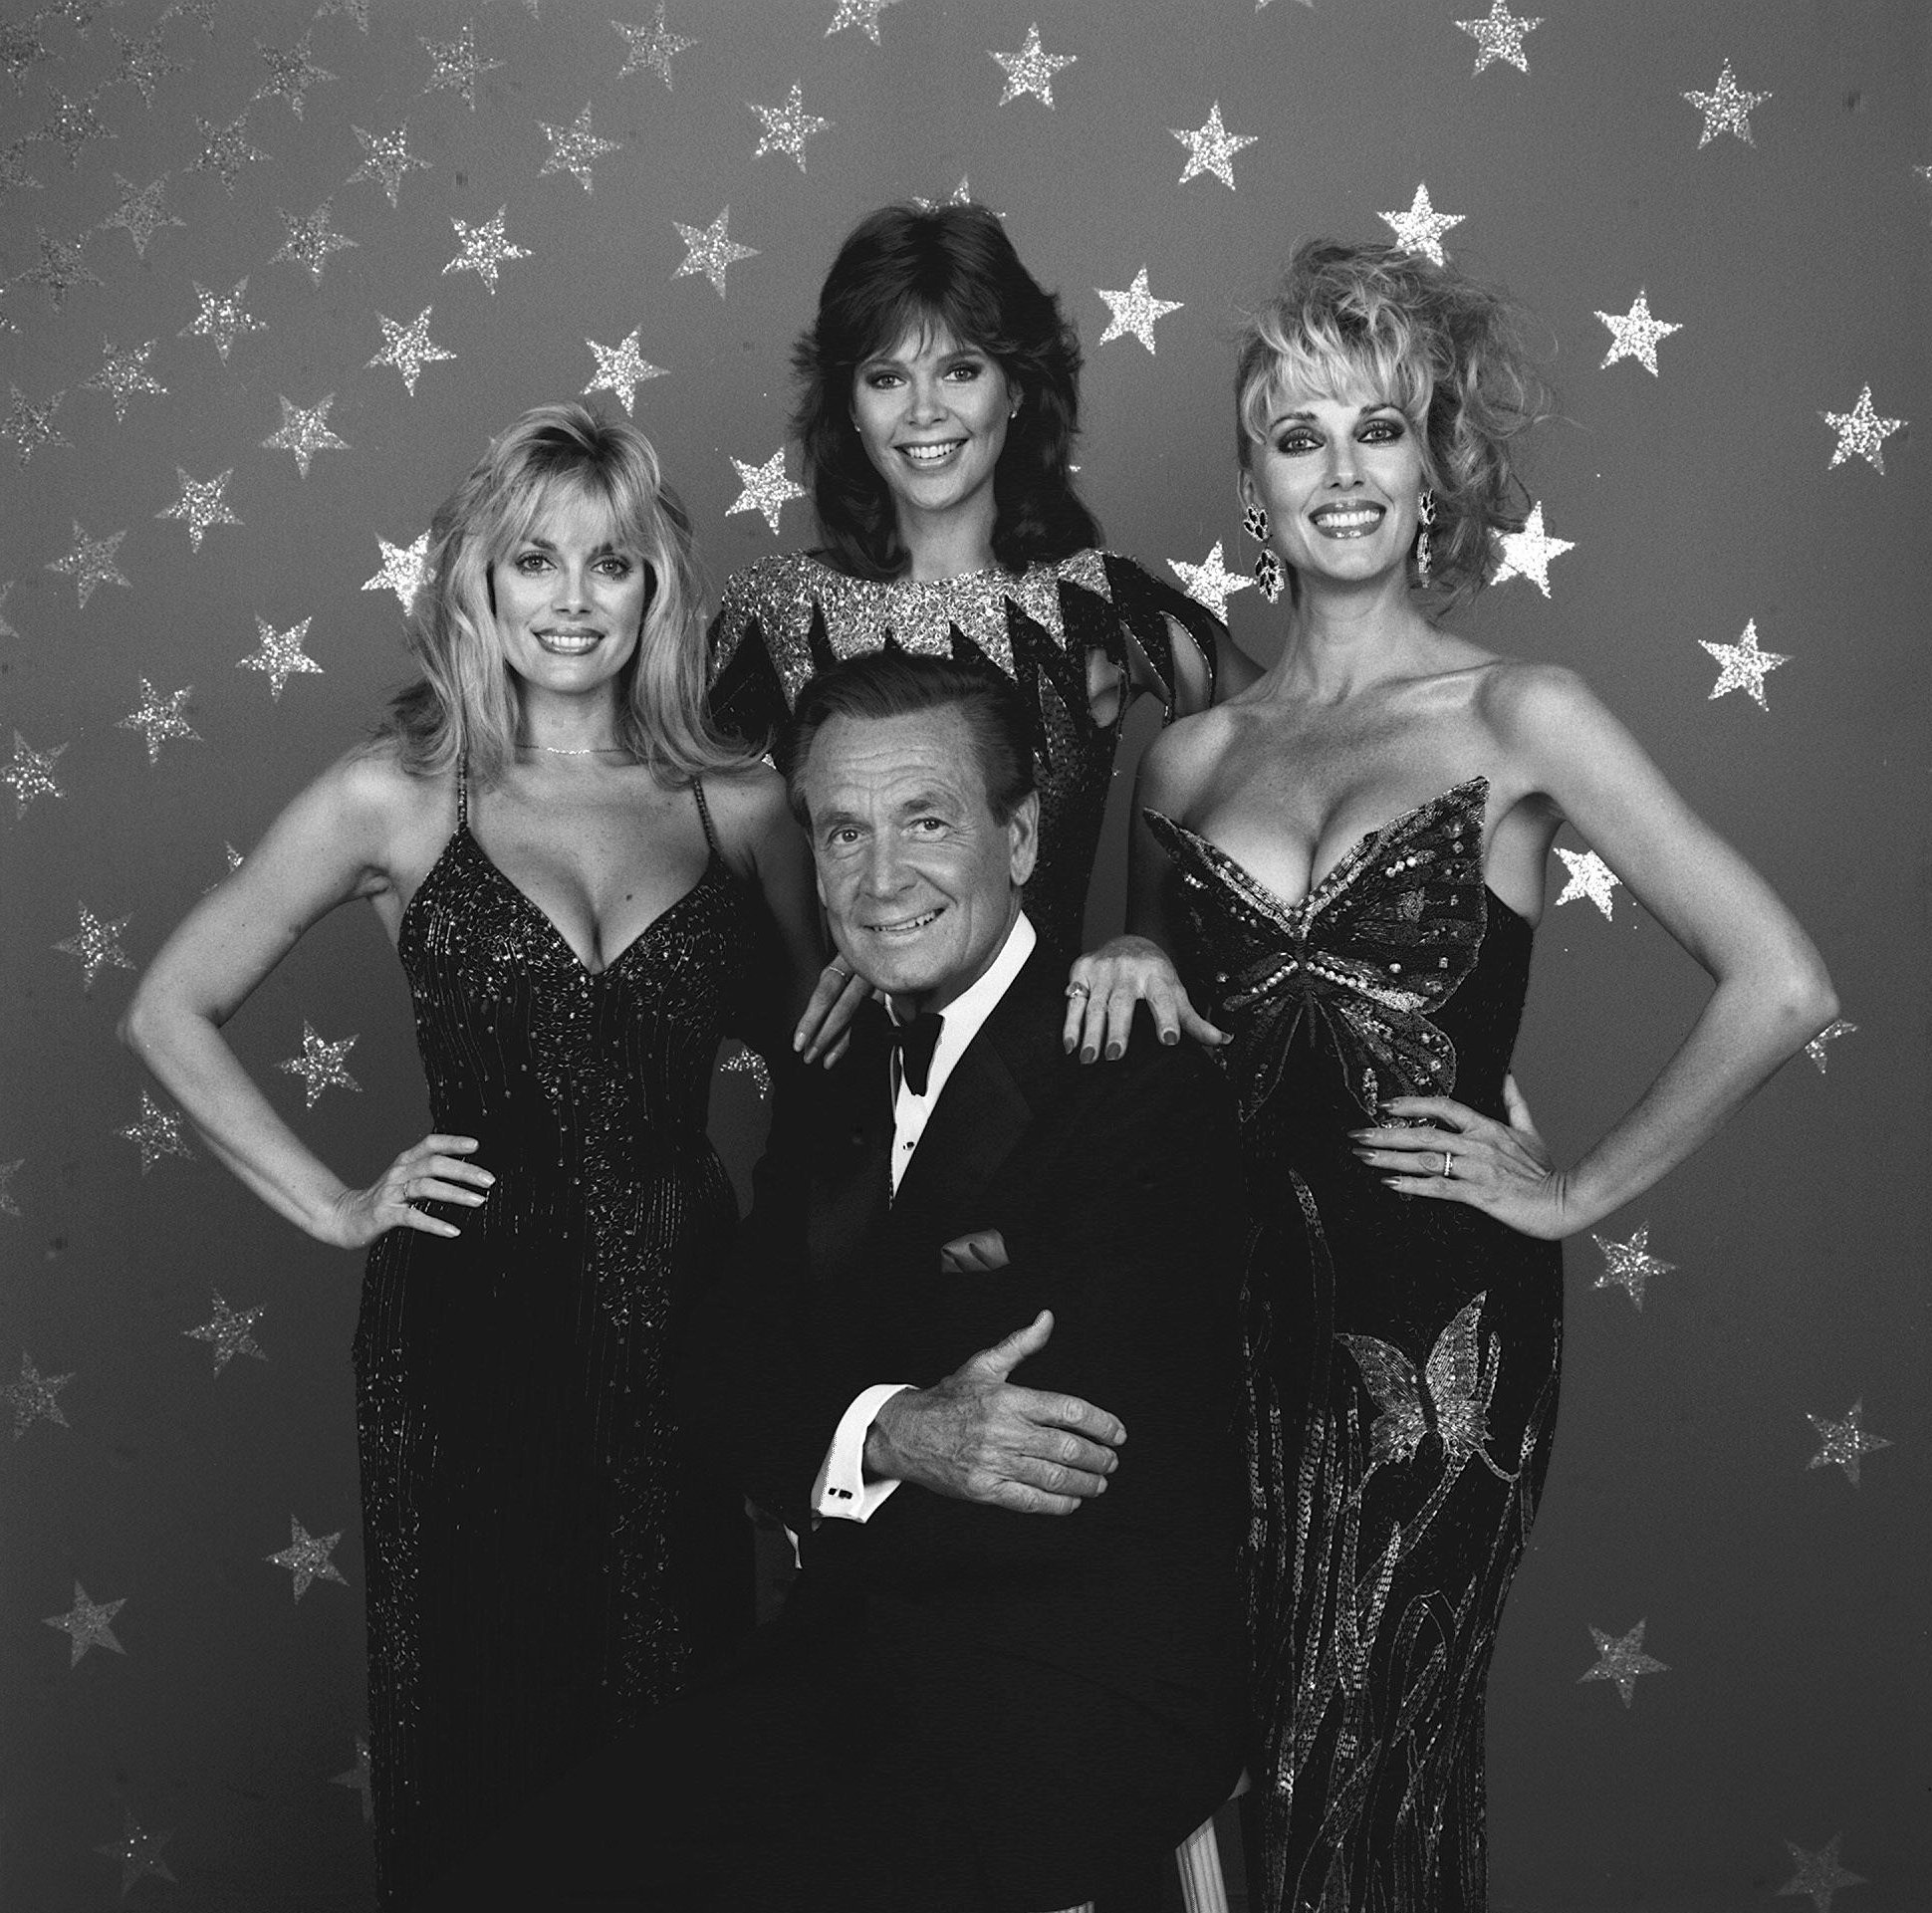 THE PRICE IS RIGHT host Bob Barker surrounded by the game show models, on July 1, 1986 | Source: Getty Images